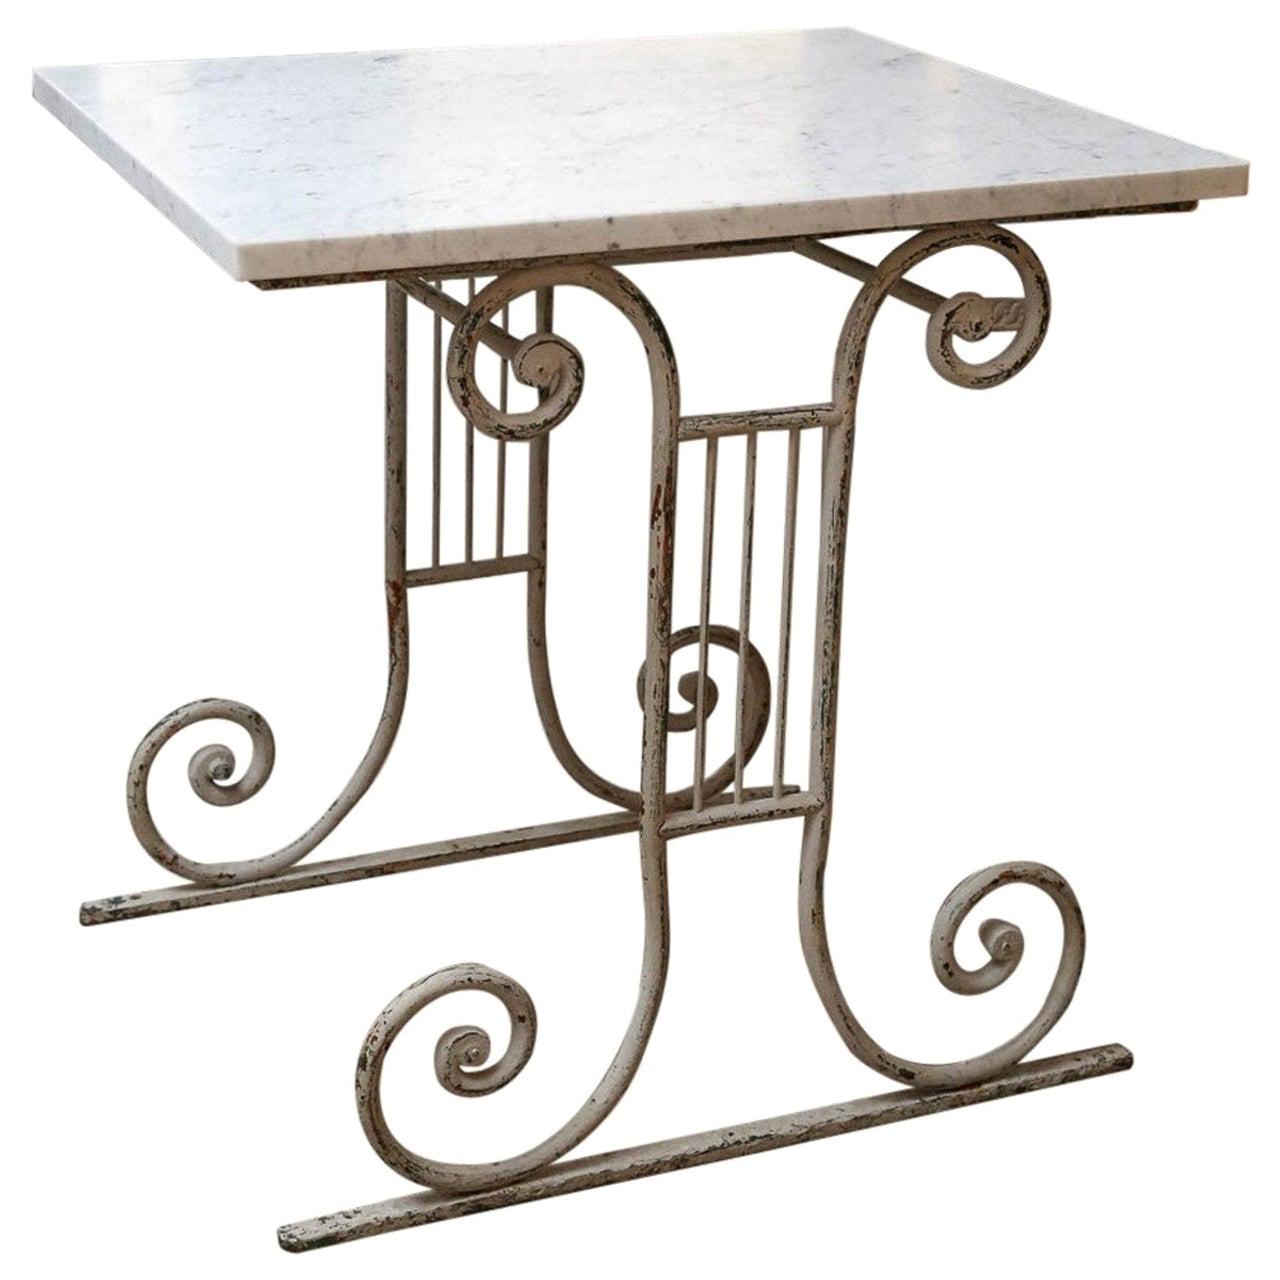 Marble-Top White-Painted Iron Base Table